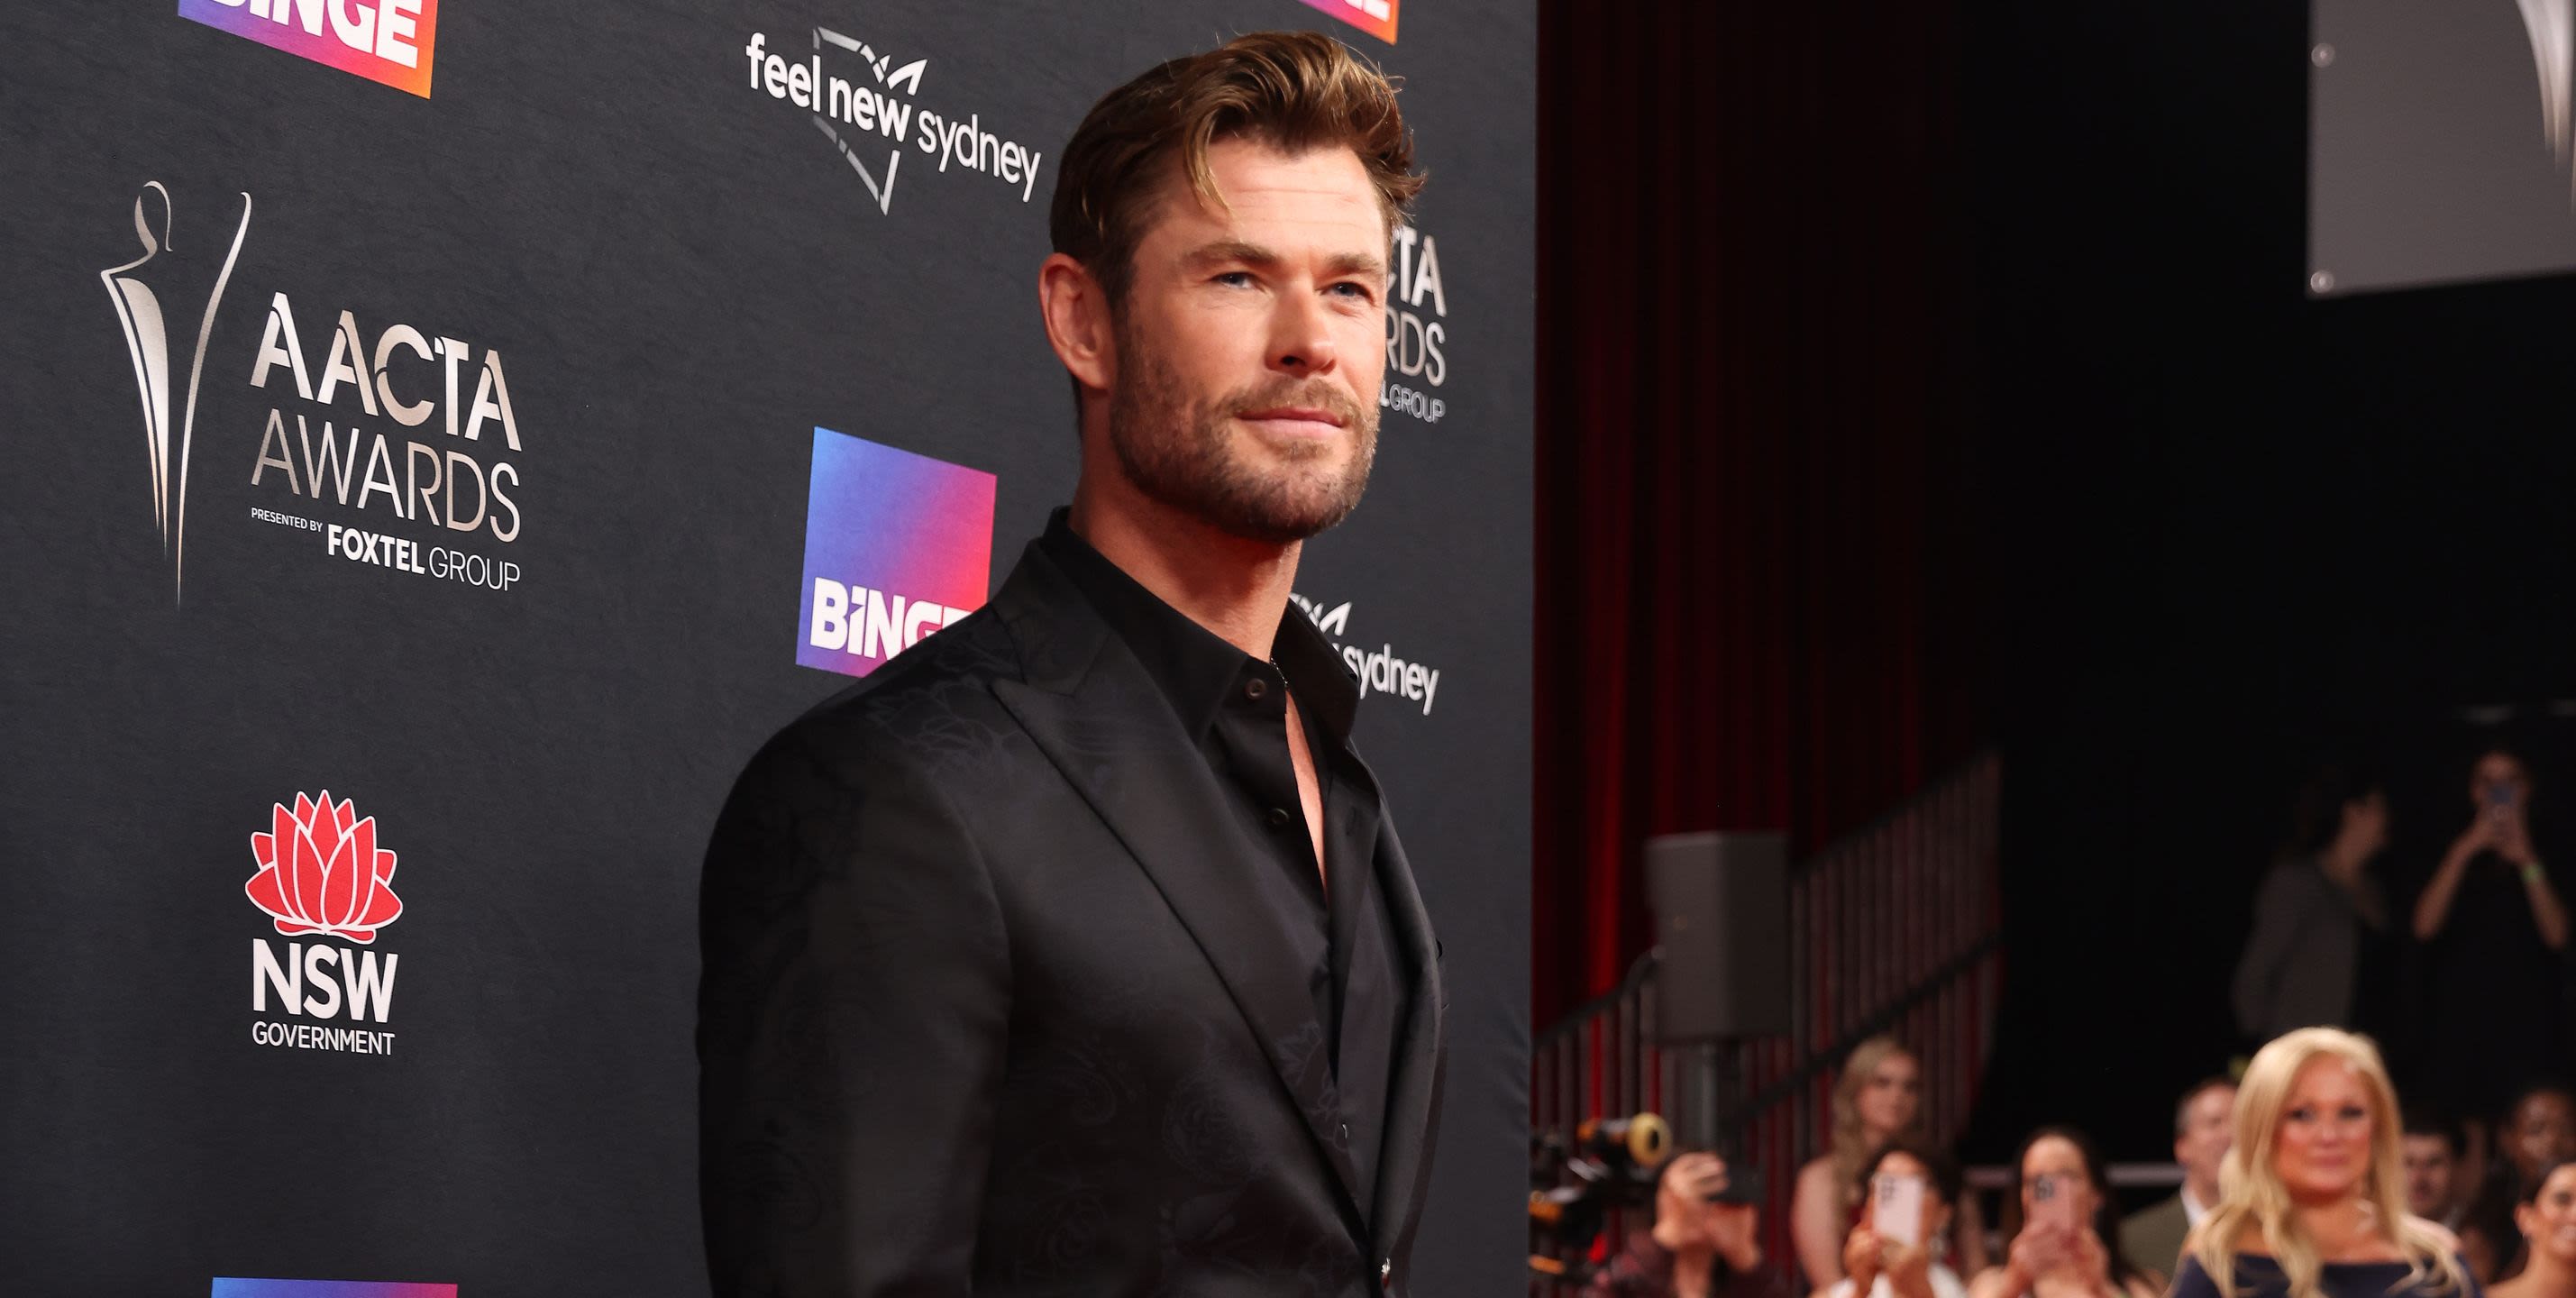 Chris Hemsworth lines up role in Transformers / GI Joe crossover movie